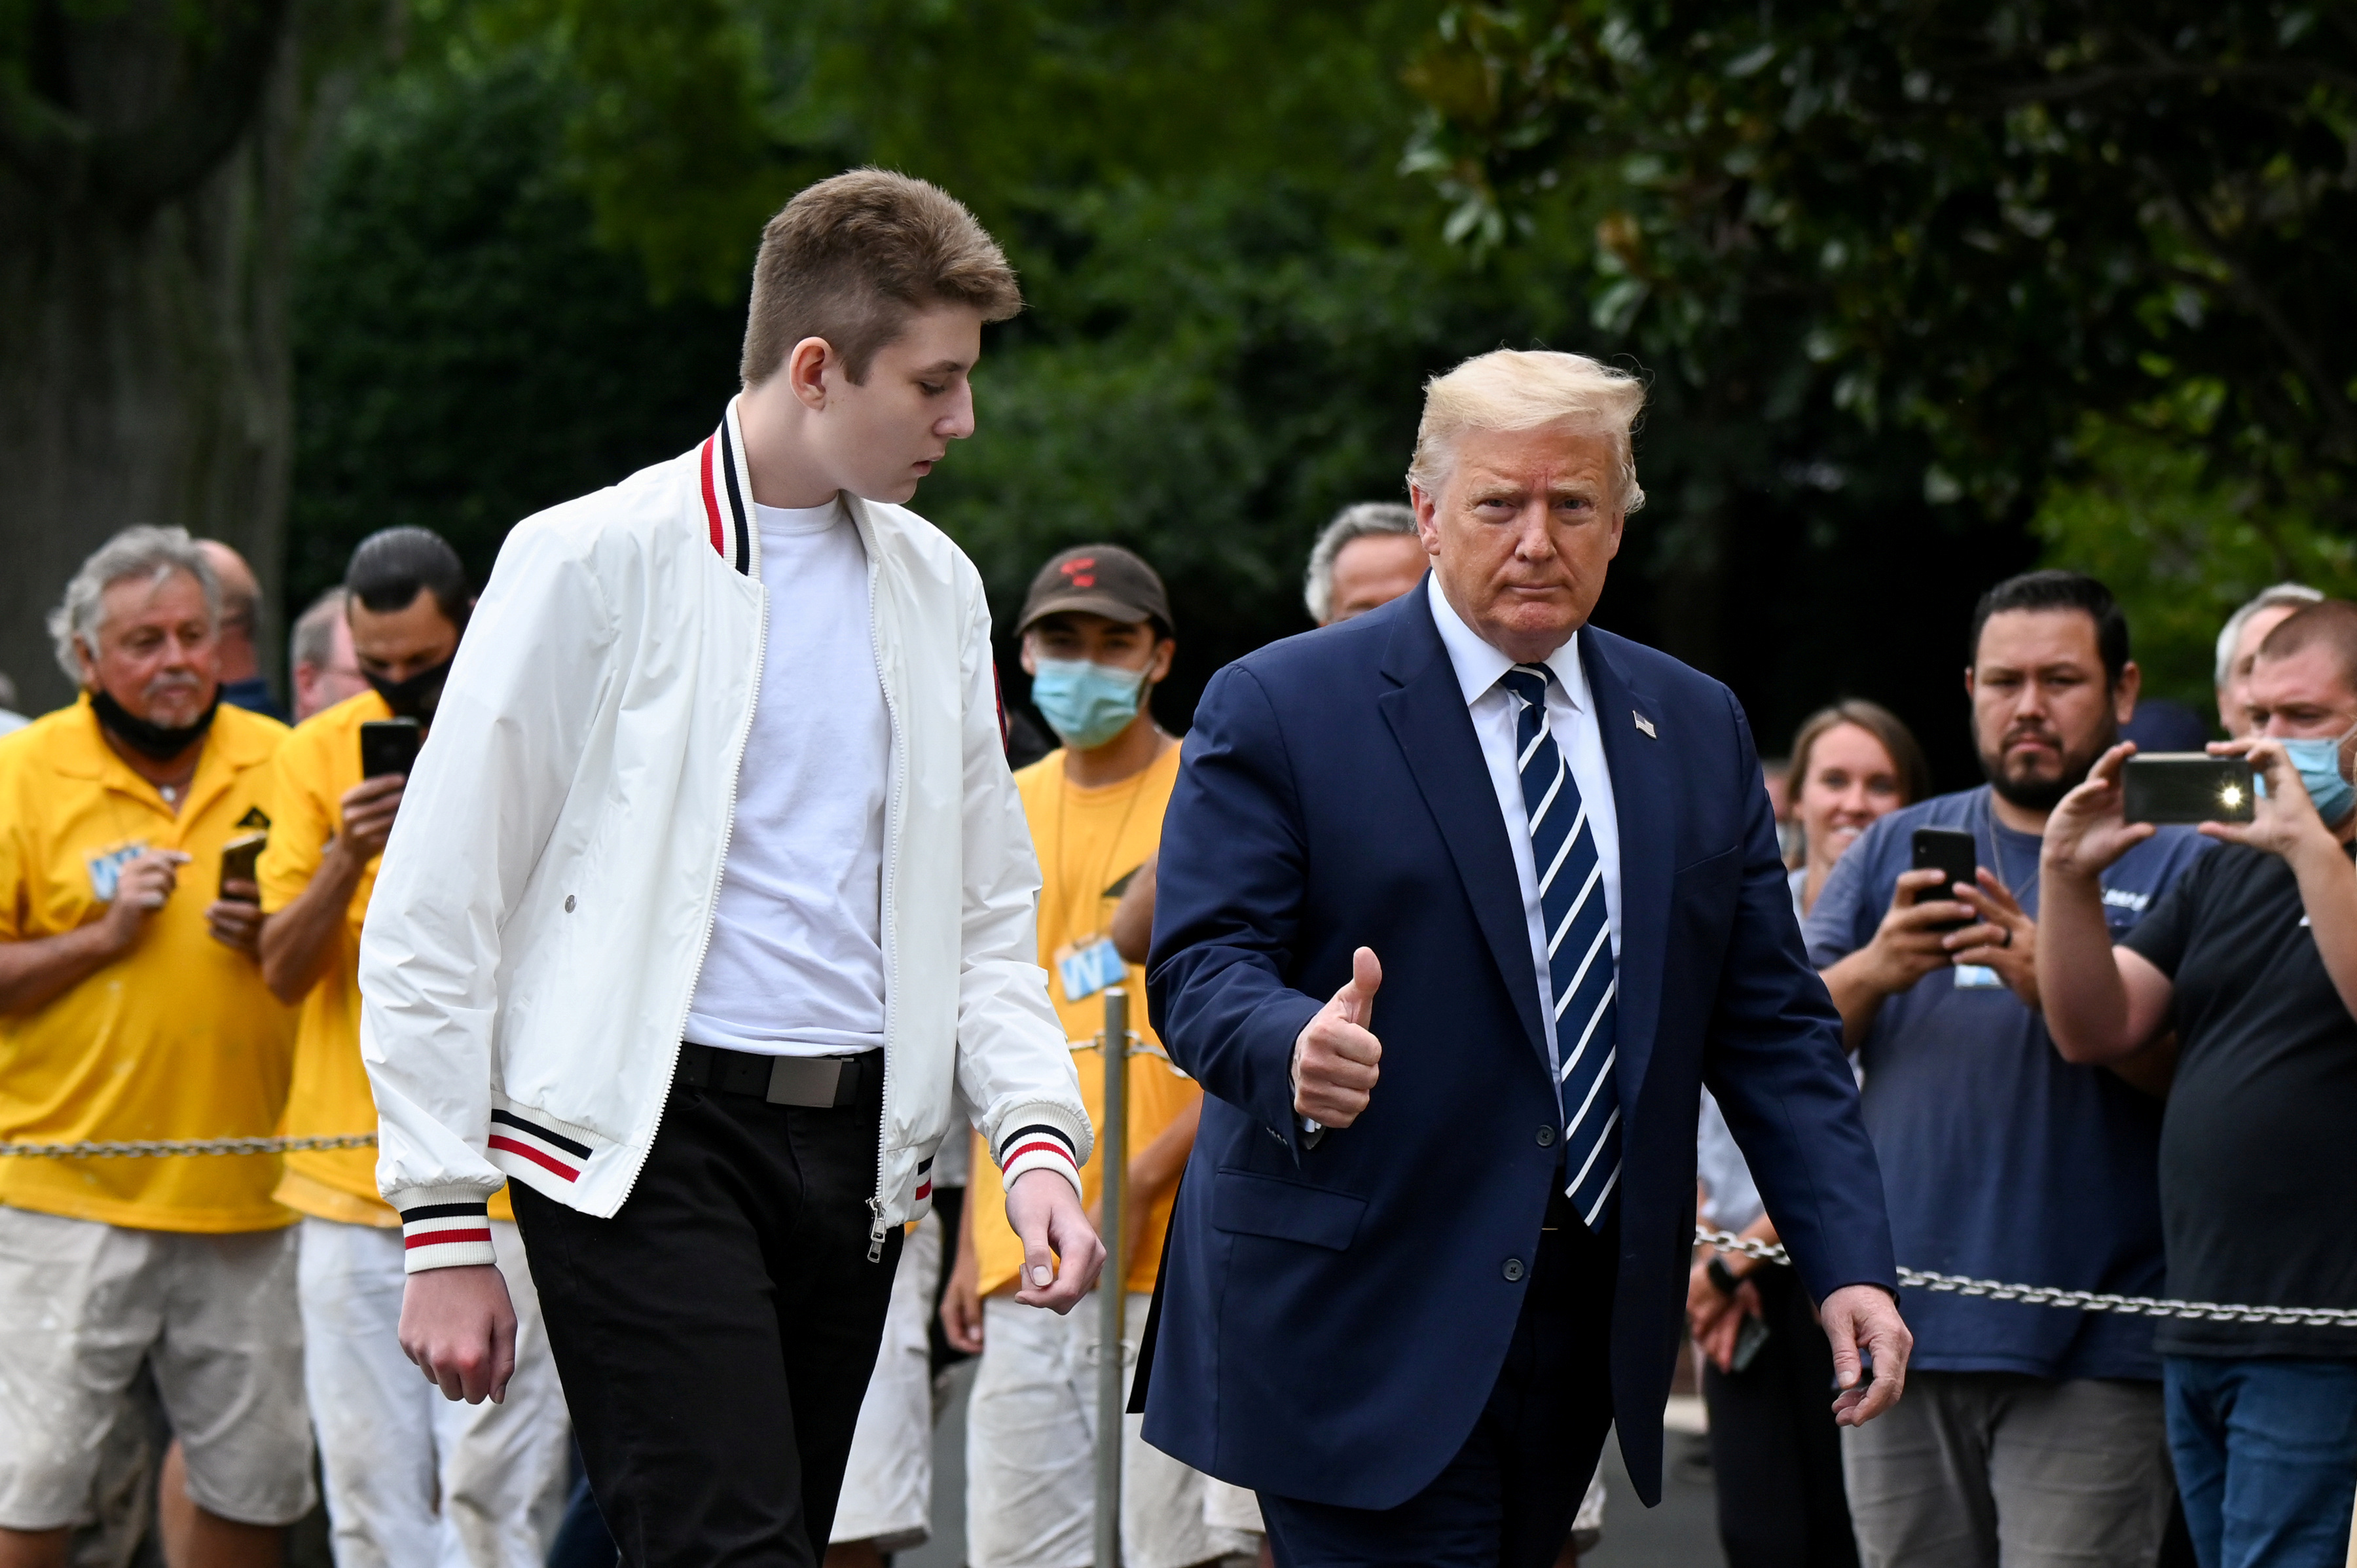 U.S. President Donald Trump and his son Barron walk to the White House from Marine One